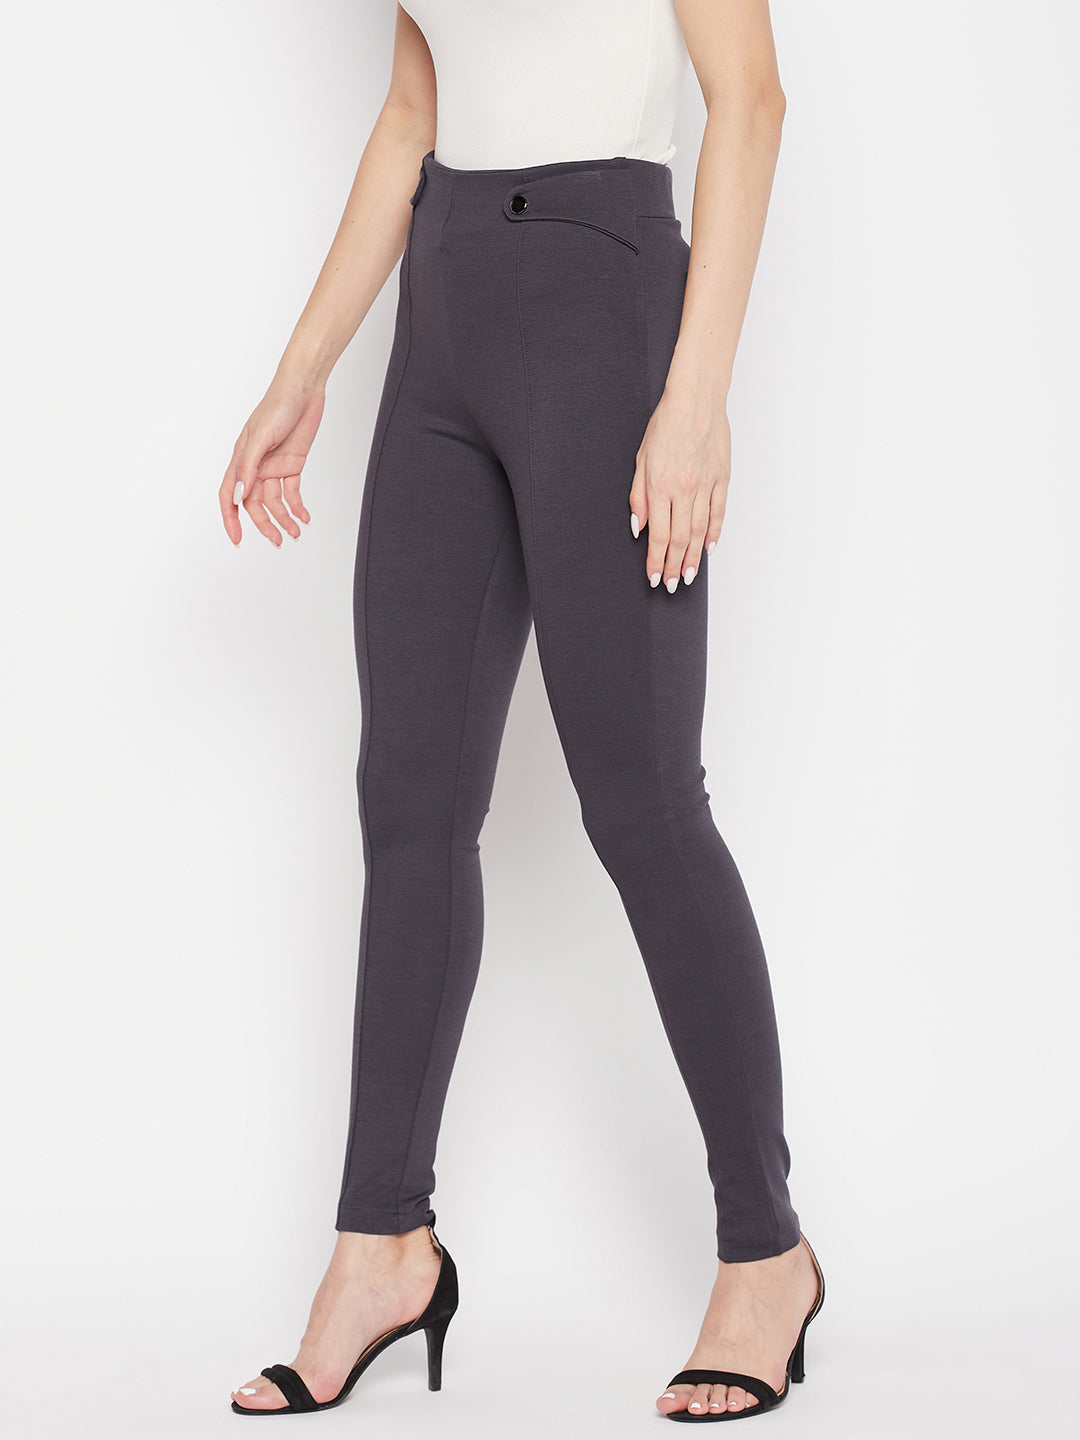 Clora Grey Solid Relaxed Fit Jeggings